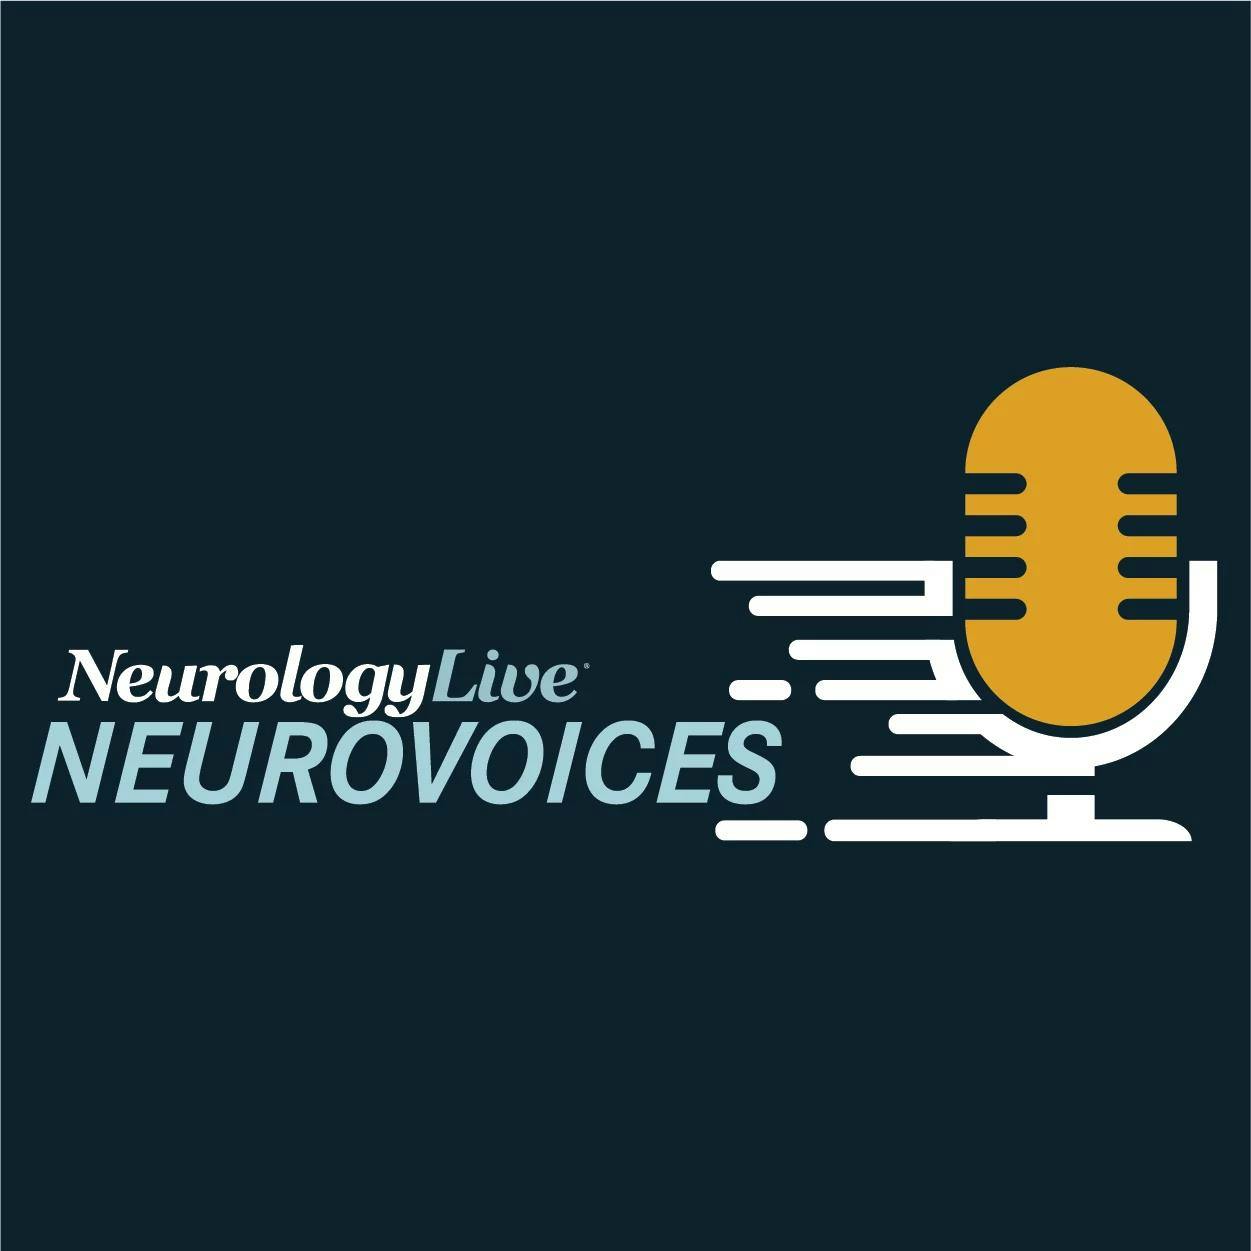 NeuroVoices: Jennifer Gudeman, PharmD, on the Effect of Once-Nightly Sodium Oxybate in Narcolepsy Subtypes